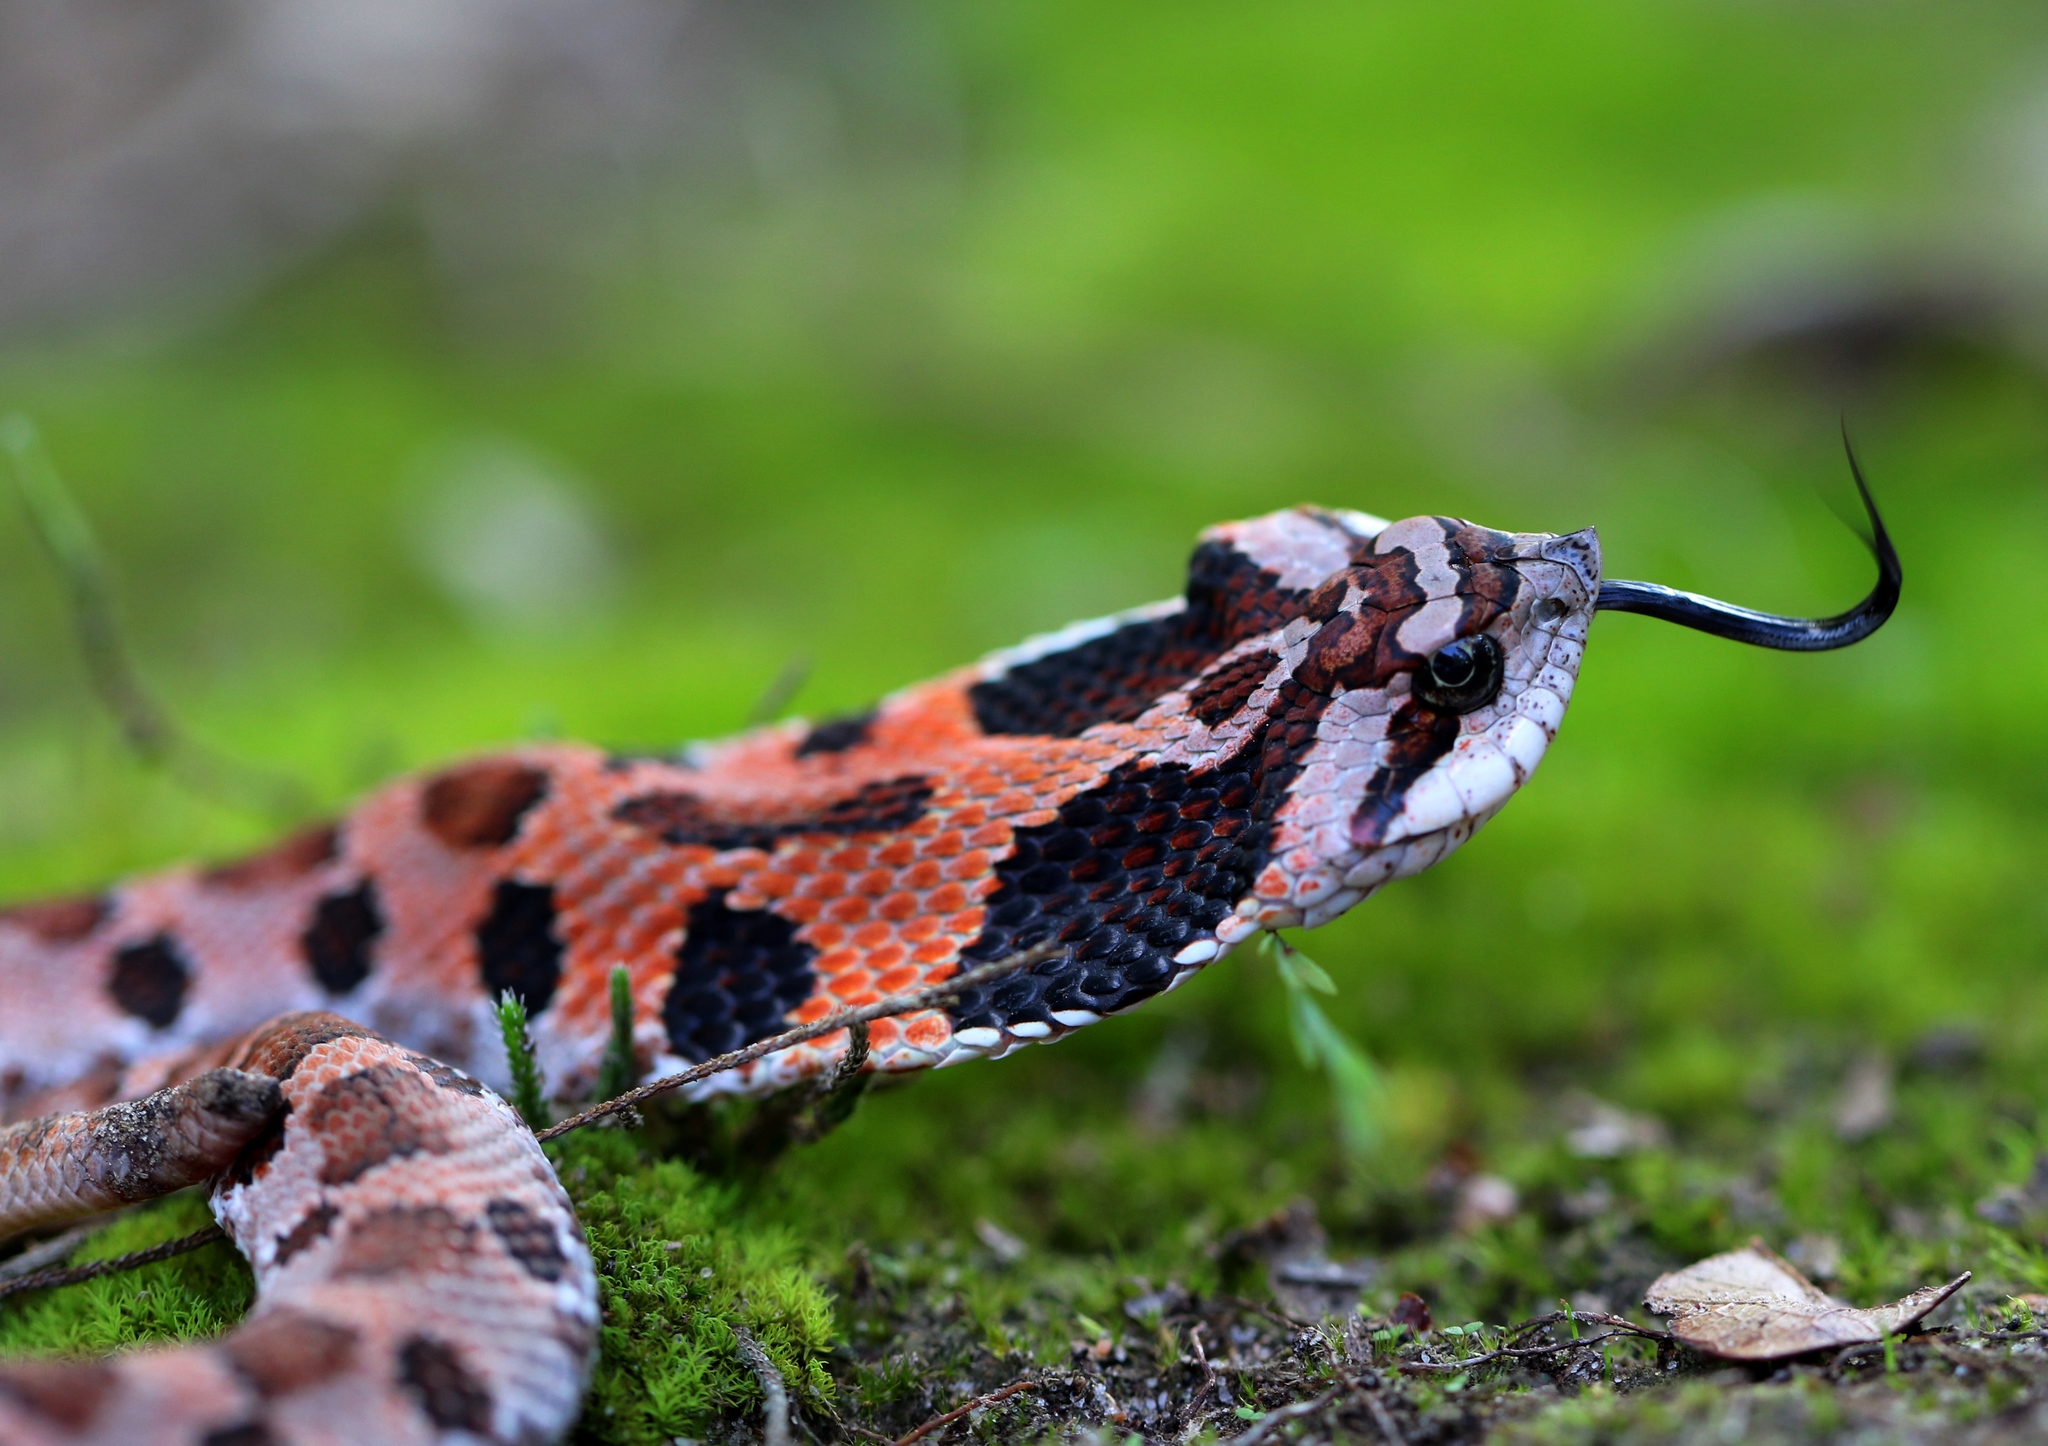 An orange and black snake lies in moss.